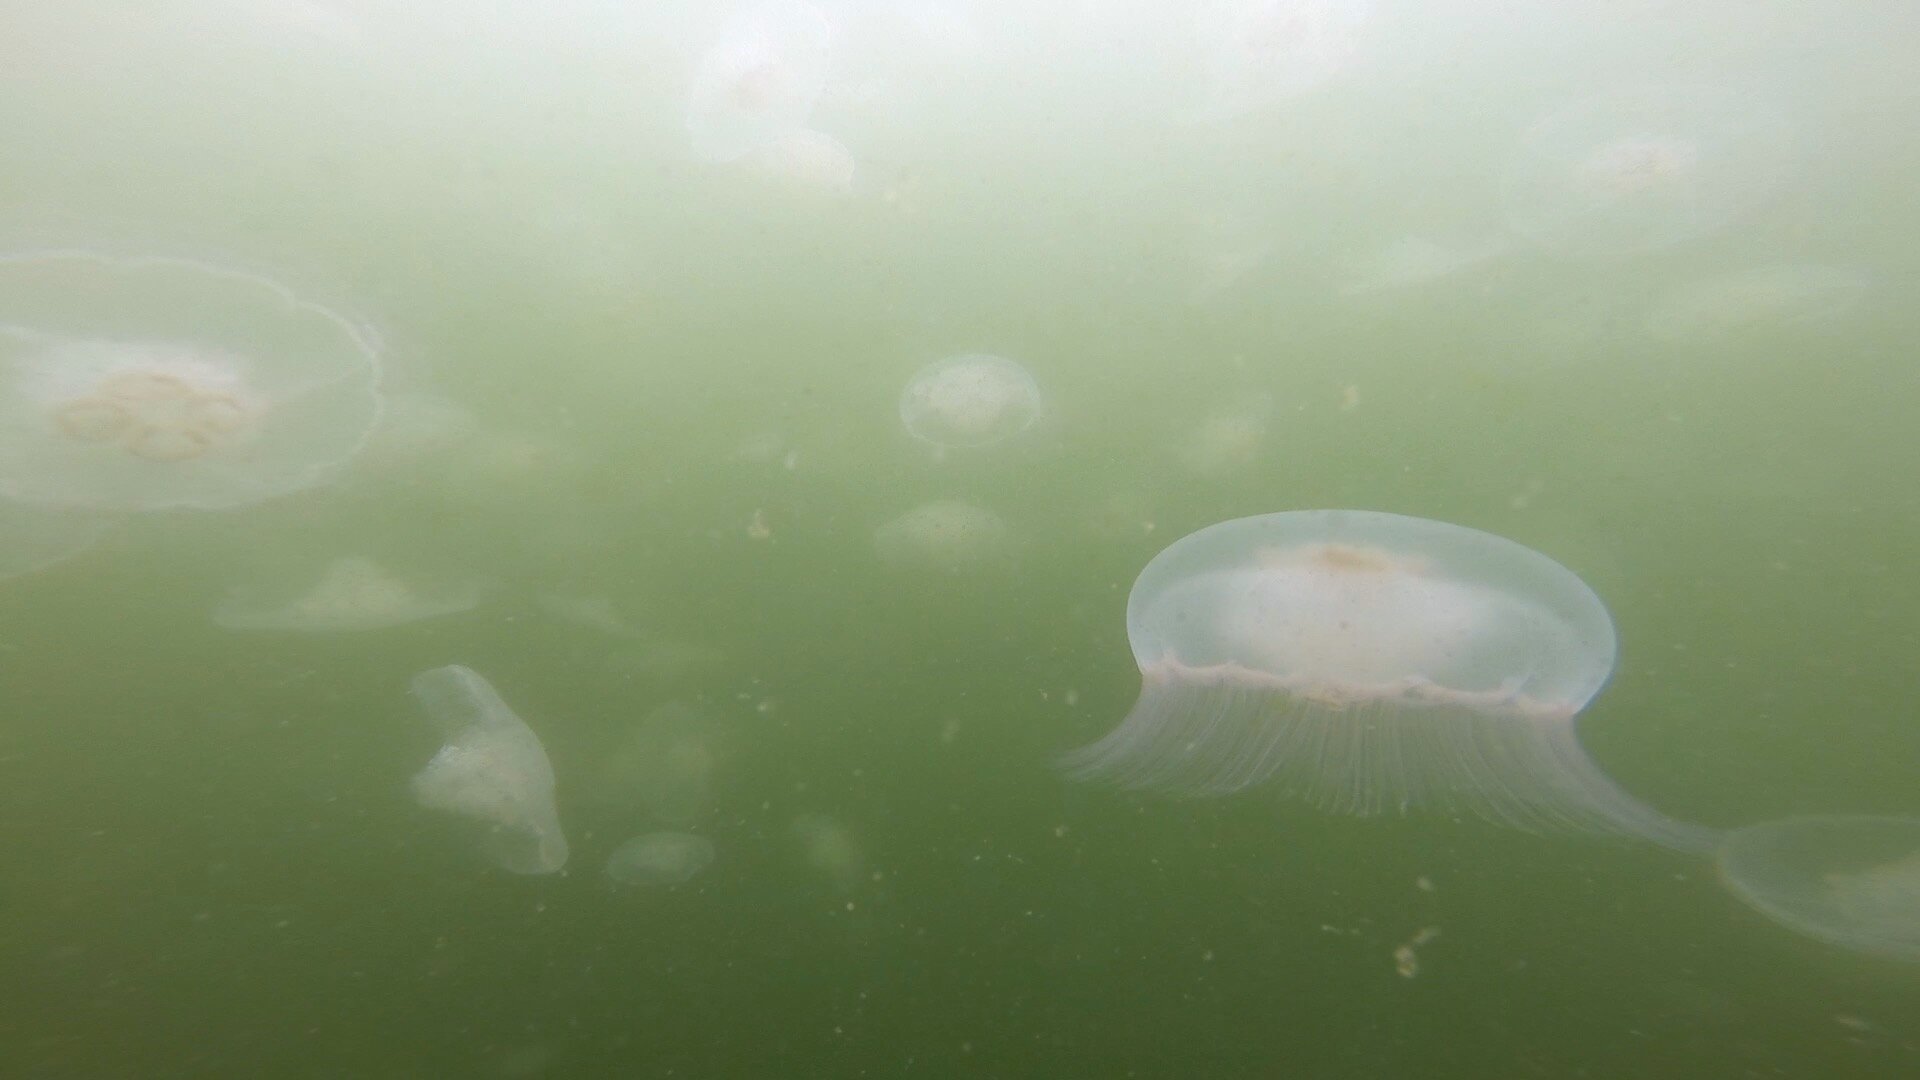 Moon jellies appear to be gobbling up zooplankton in Puget Sound